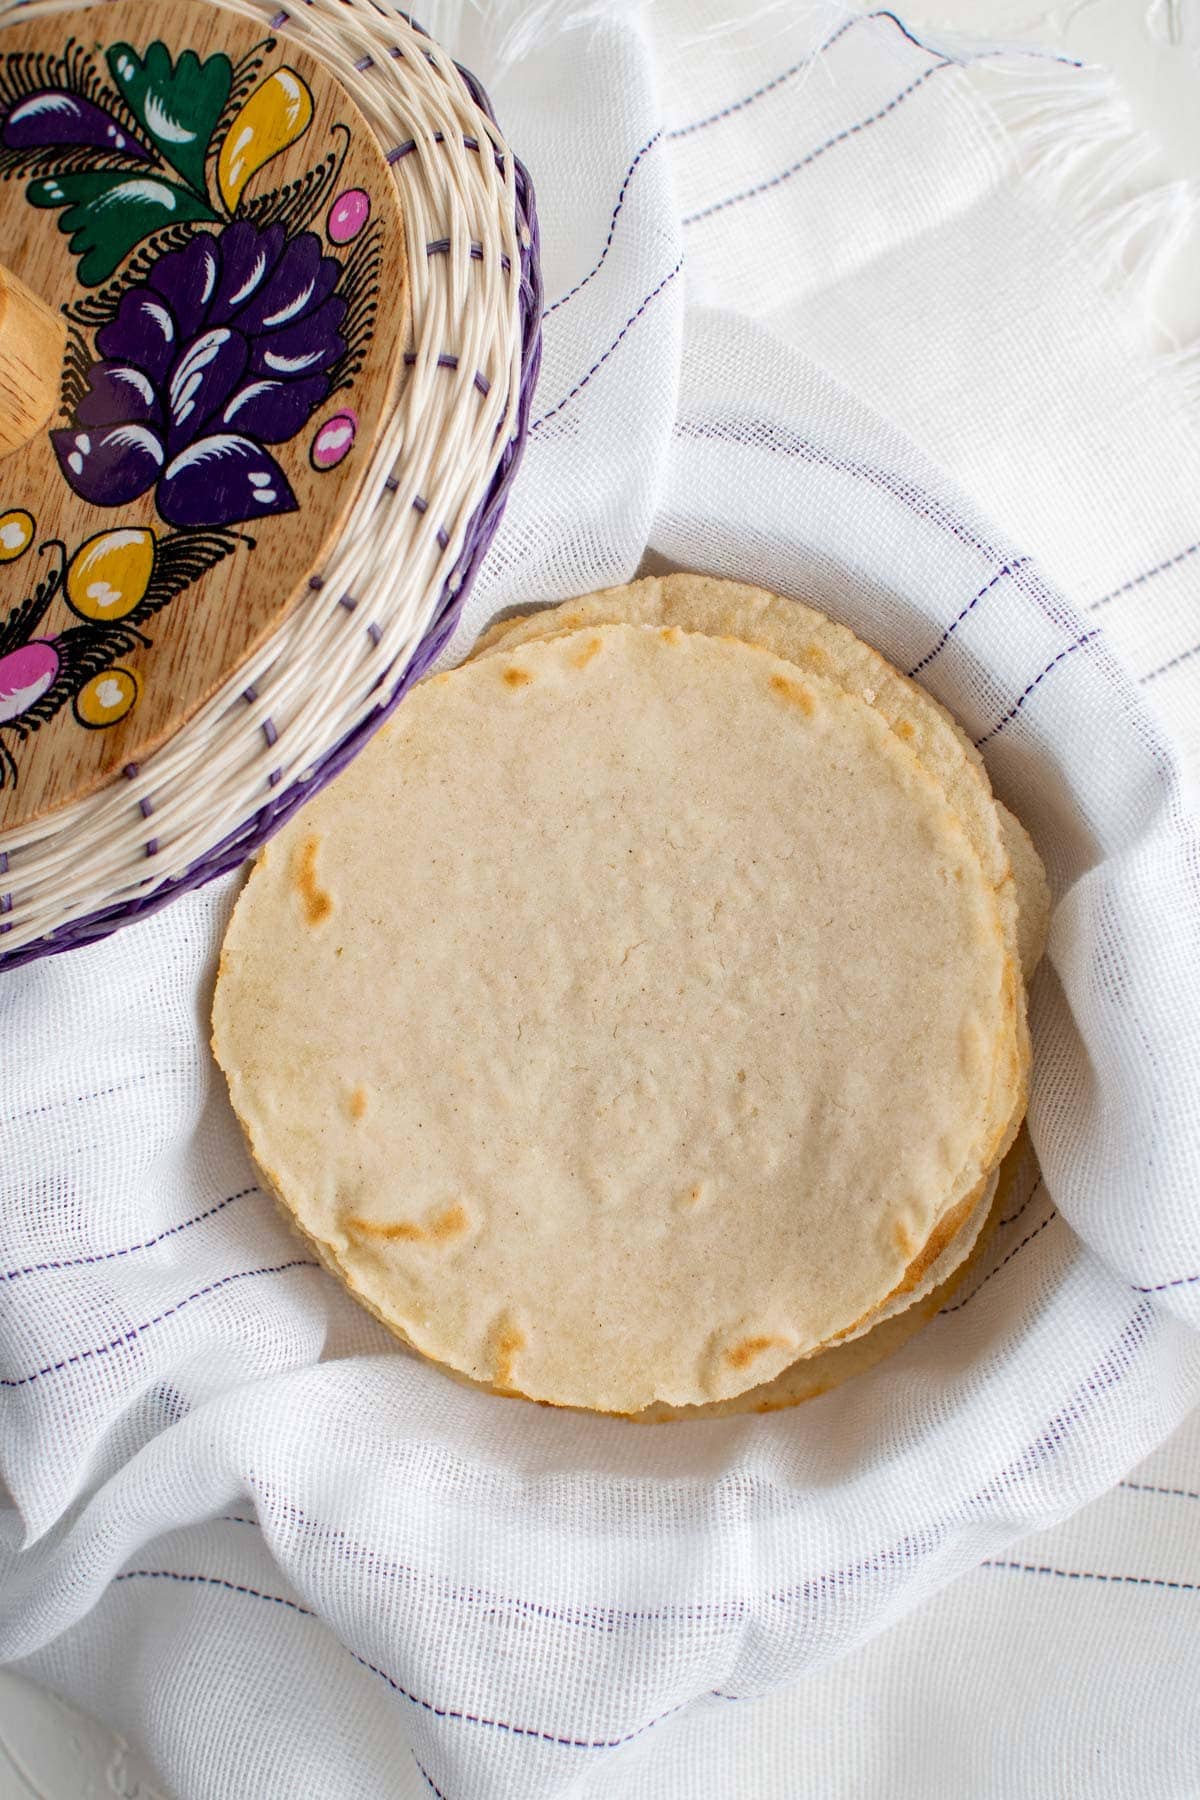 homemade corn tortillas in a basket with a white towel